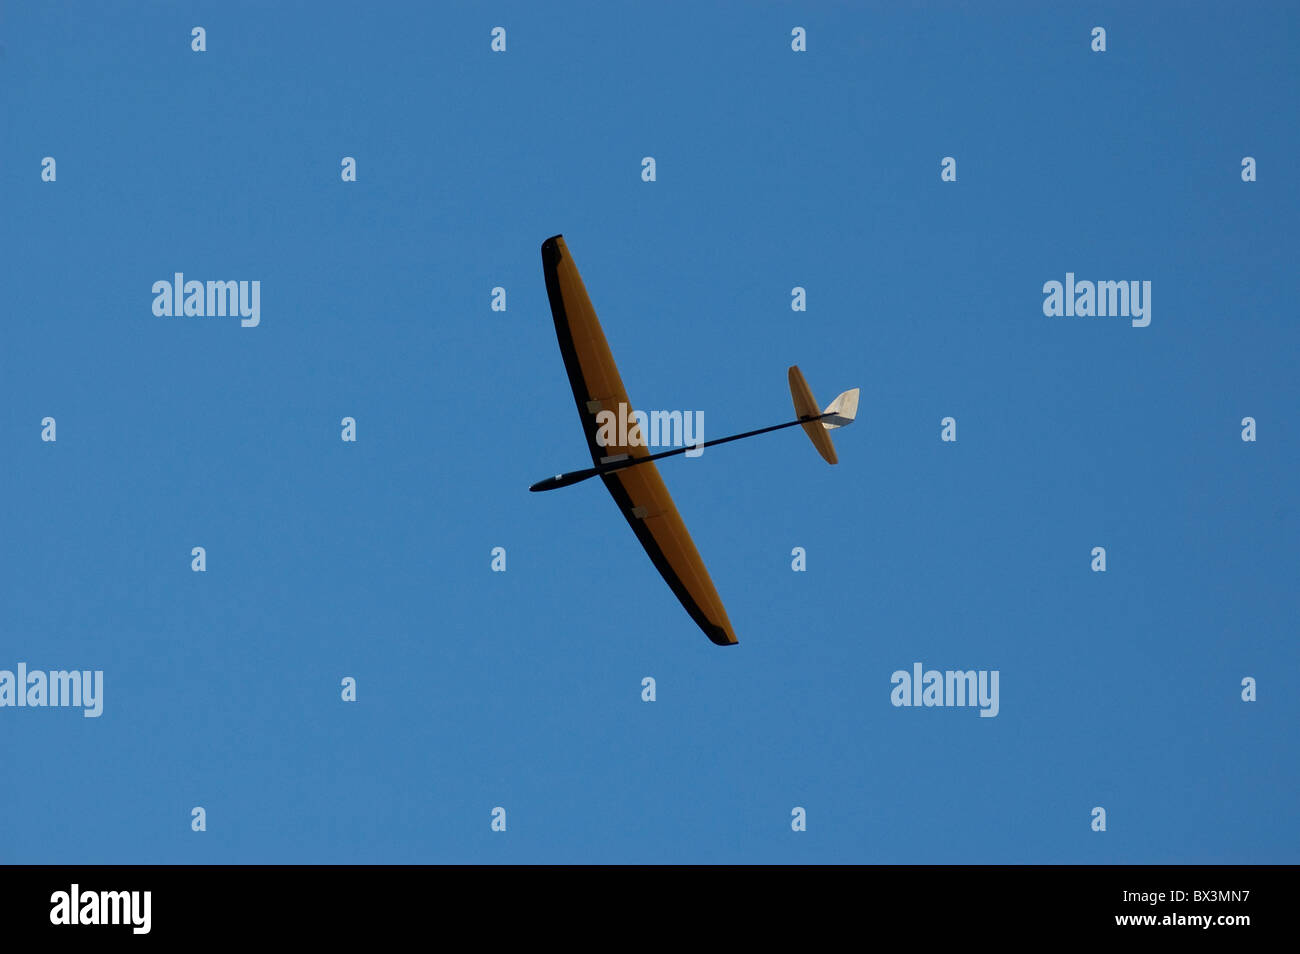 radio controlled hand launch glider soars into the blue sky during competition, Alachua, Florida Stock Photo